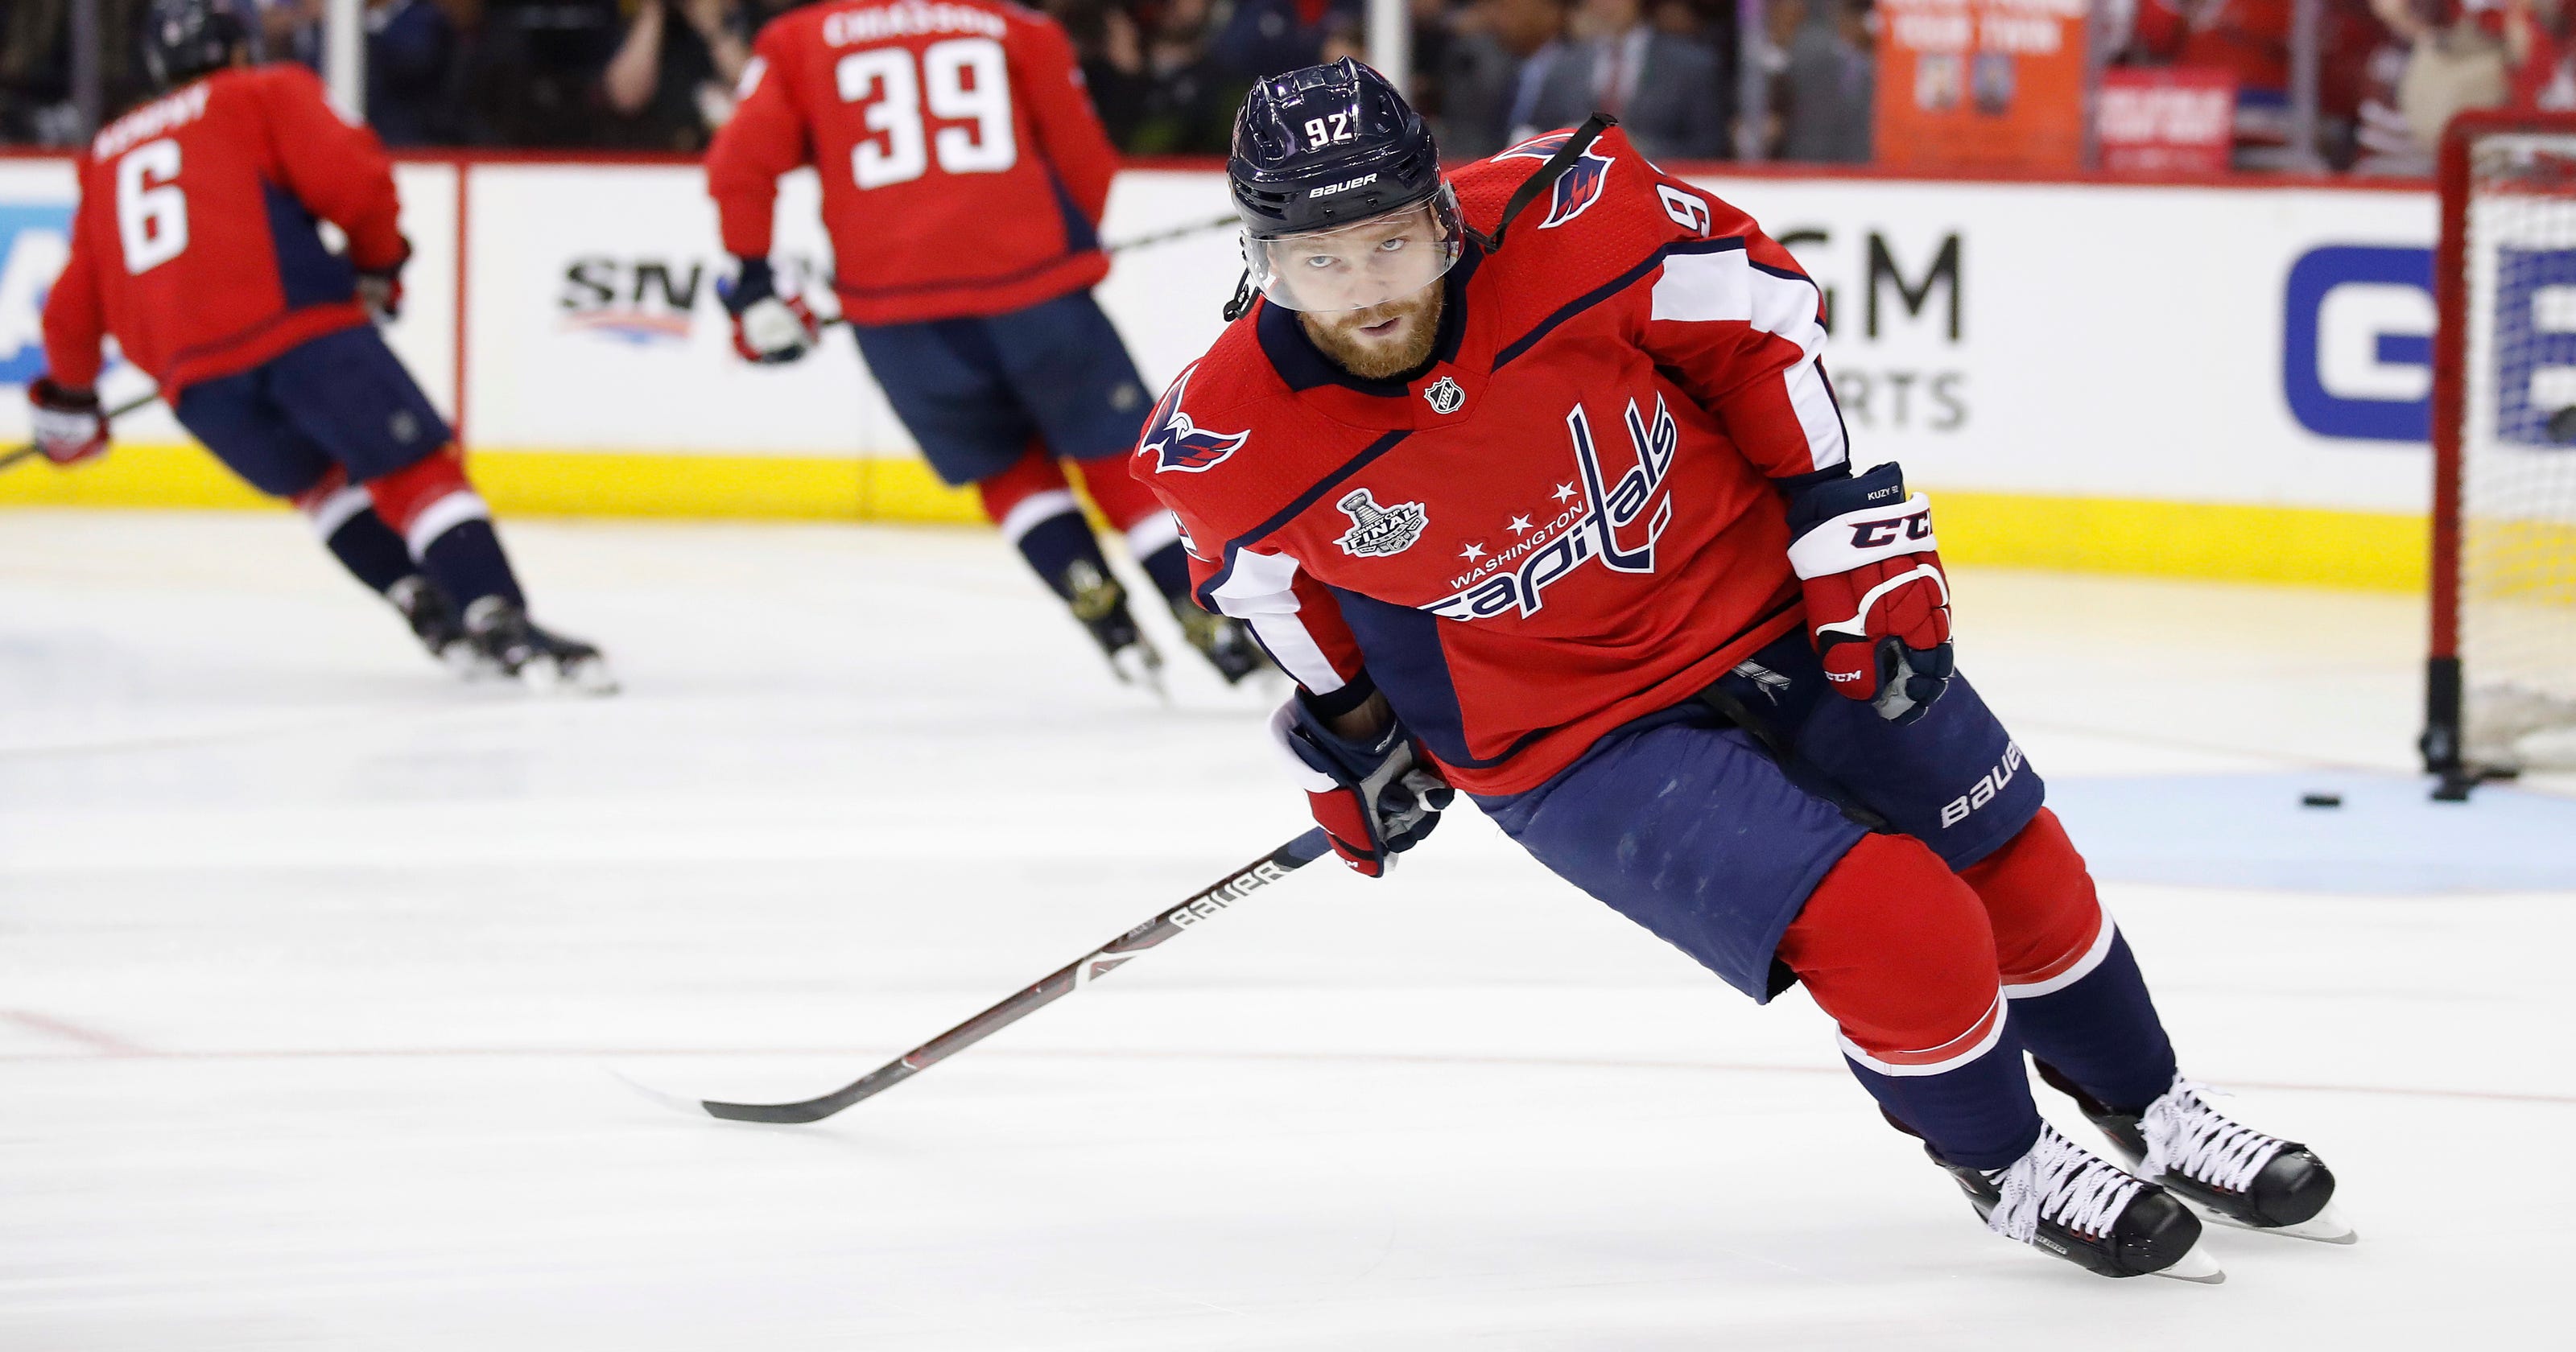 Evgeny Kuznetsov banned from Russian team for cocaine but can play for ...